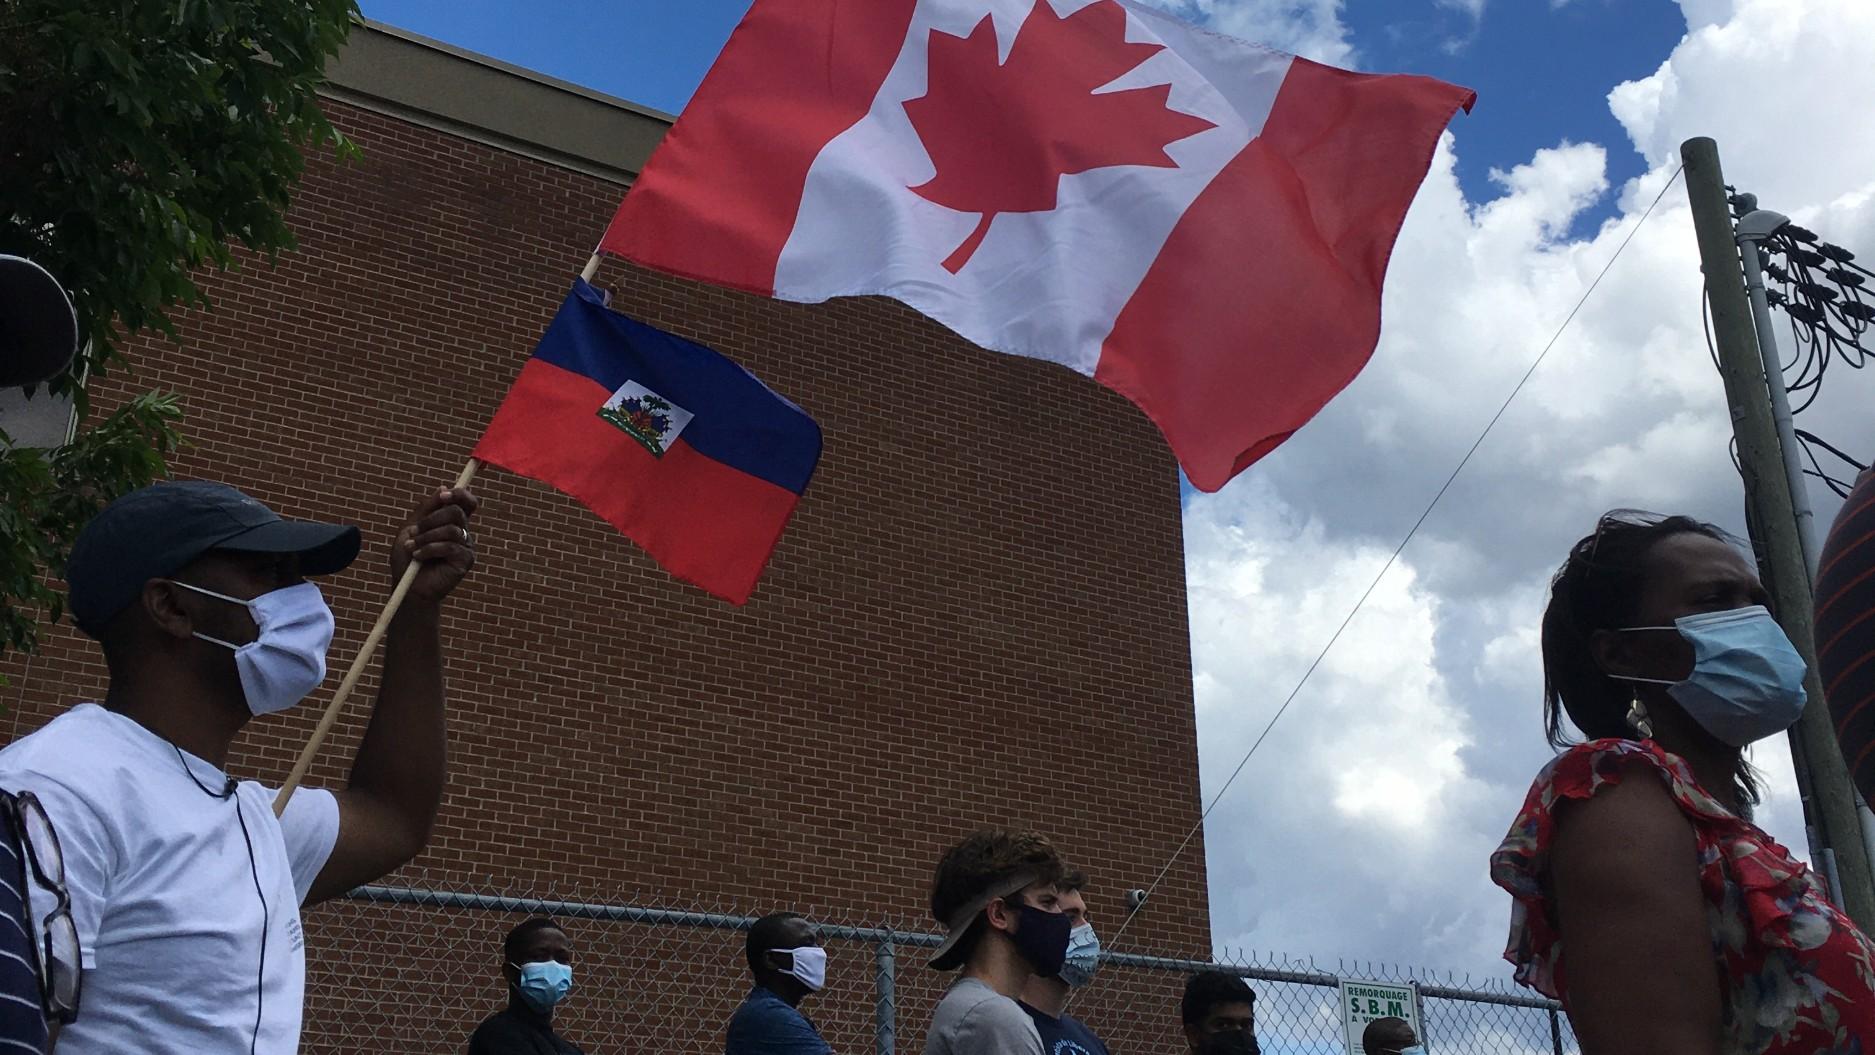 With Canadian and Haitian flags hoisted, marchers take part in demonstration in support of asylum-seekers working in Quebec's long-term care homes in Montreal, Canada, in June.